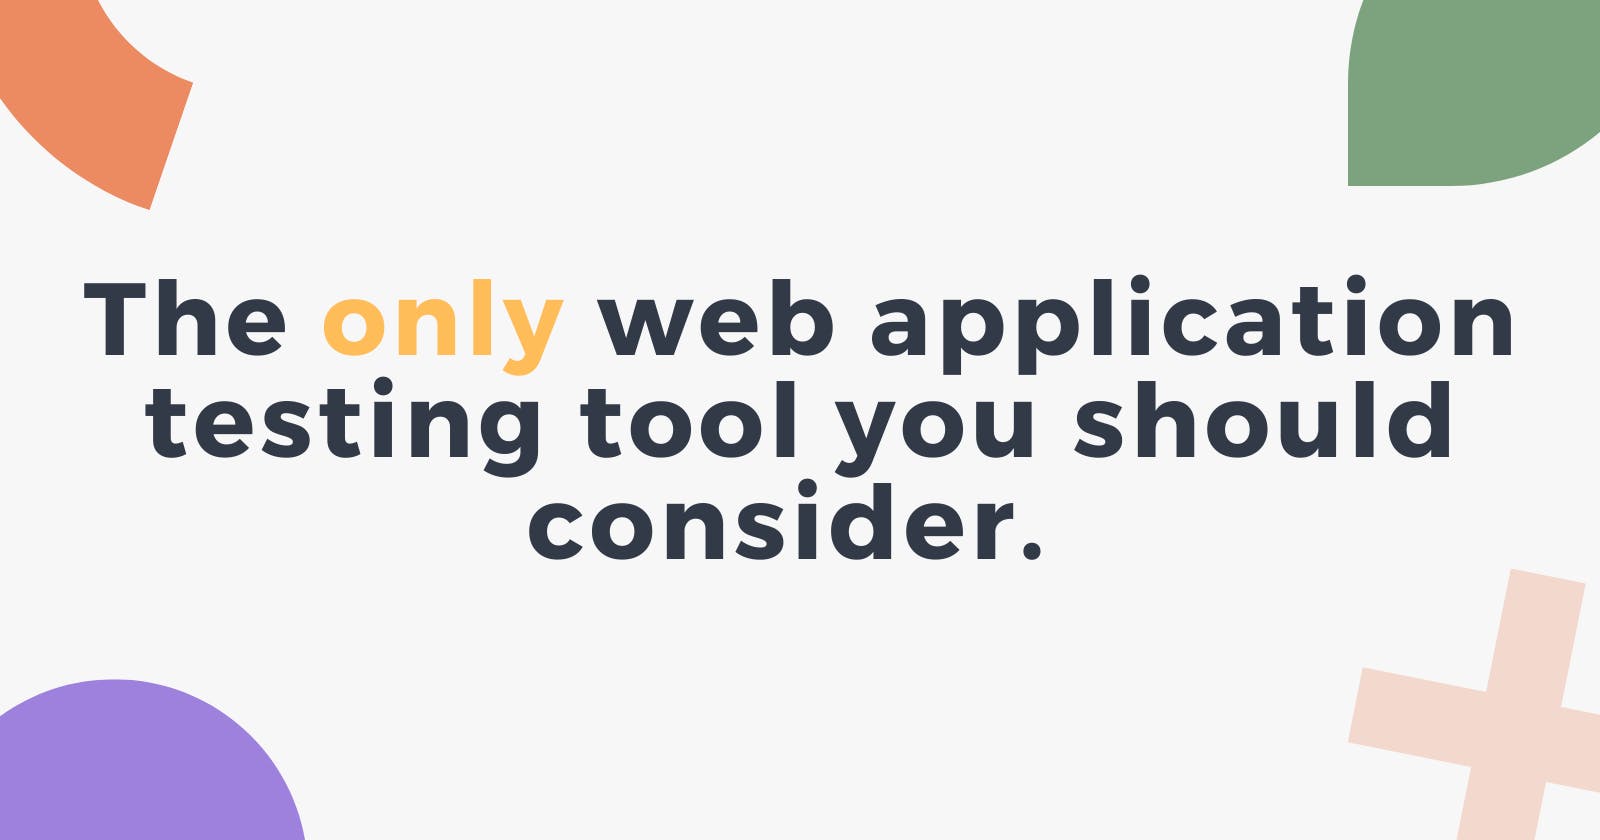 The only web application testing tool you should consider